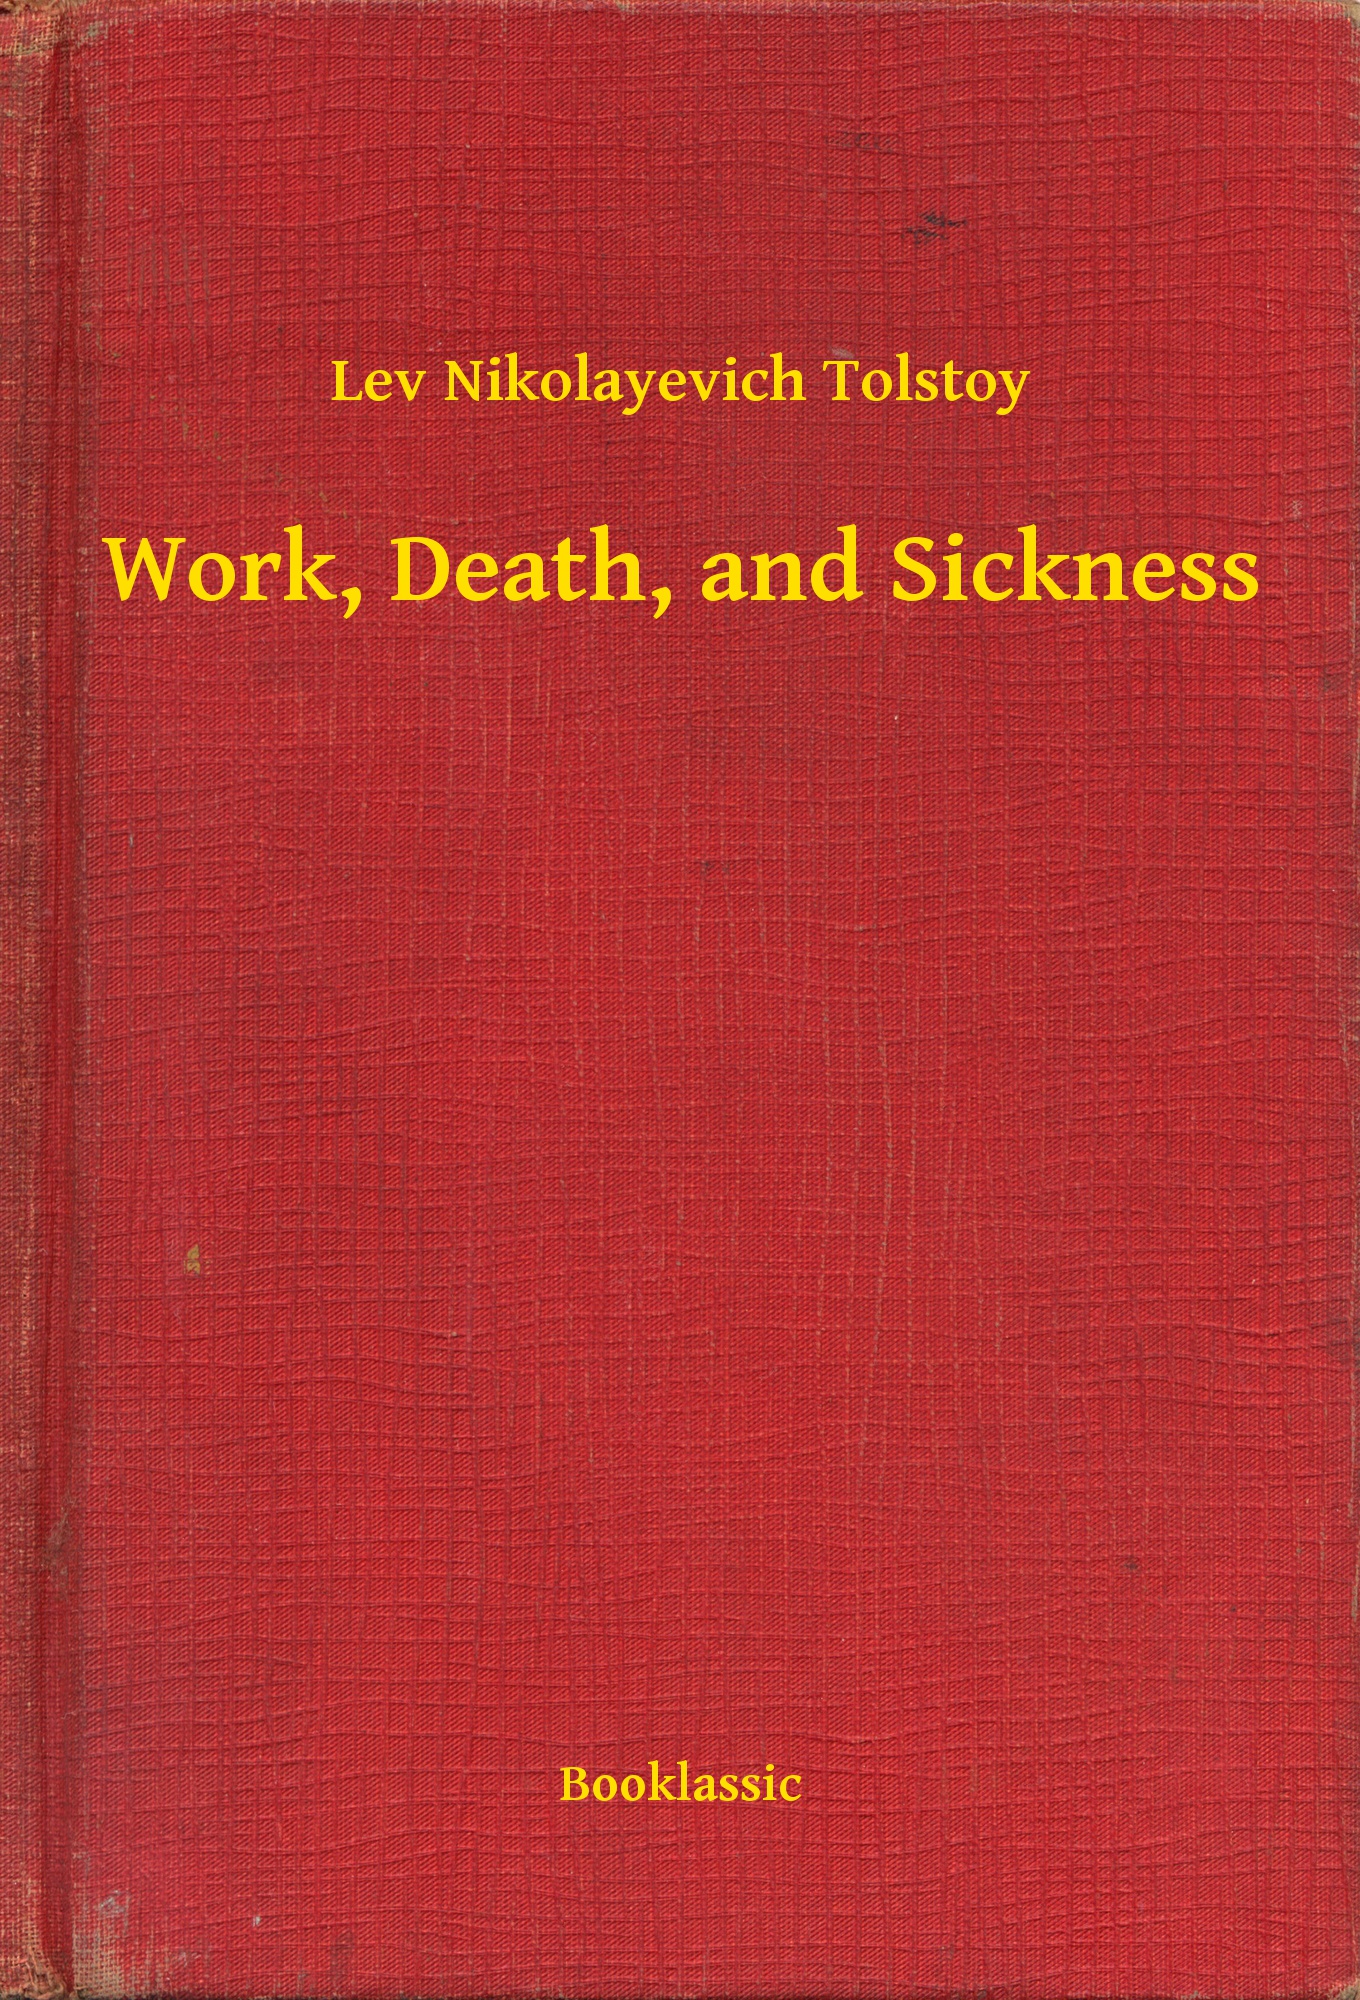 Work, Death, and Sickness